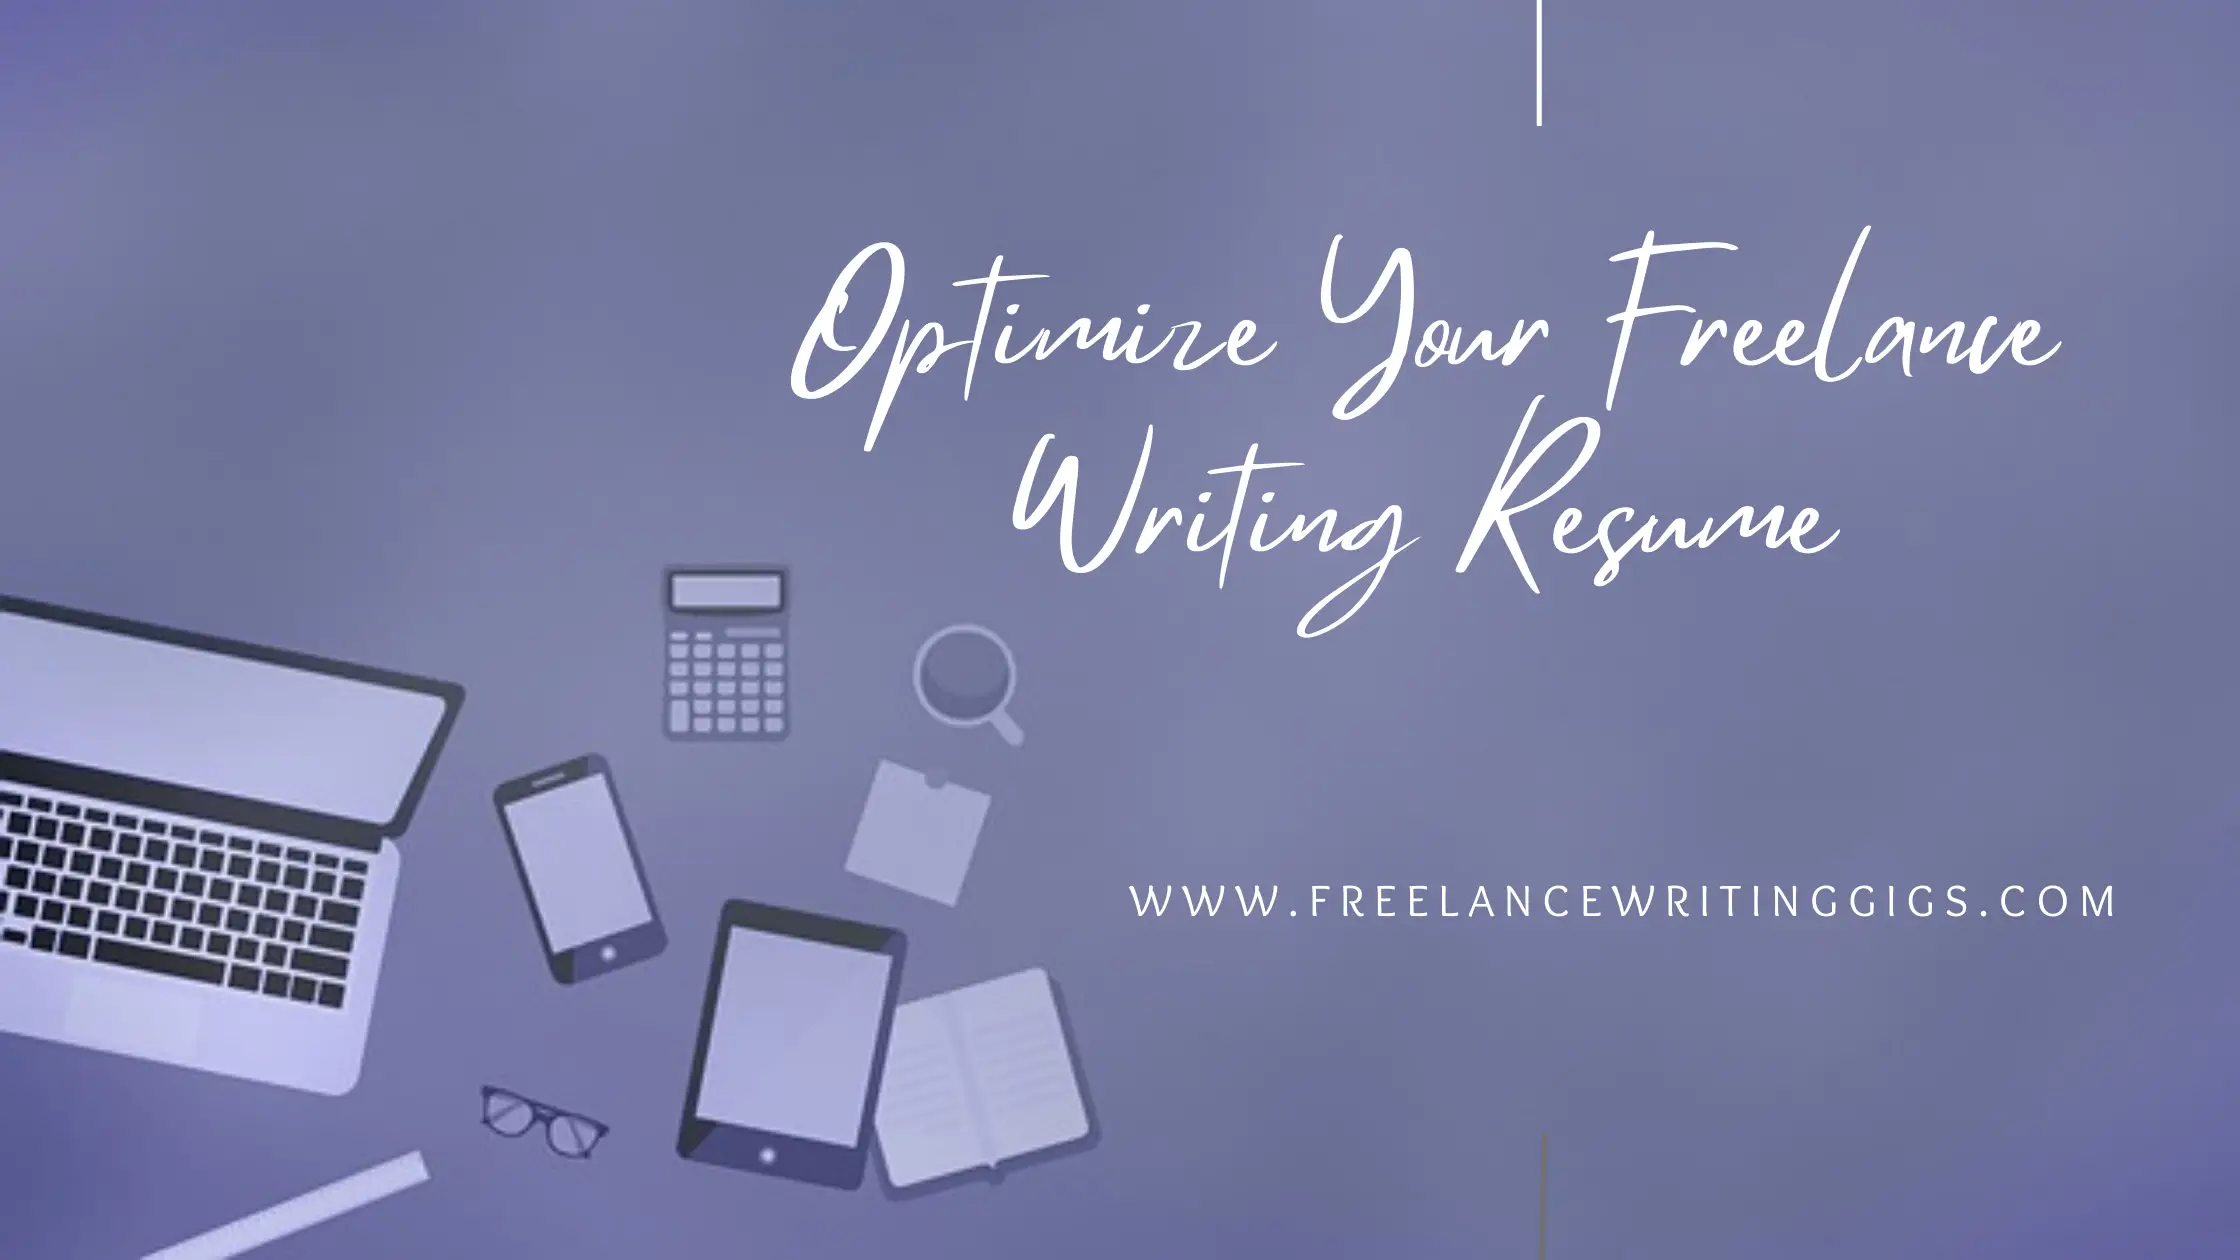 How to Use AI Writing Assistants to Optimize Your Freelance Writing Resume